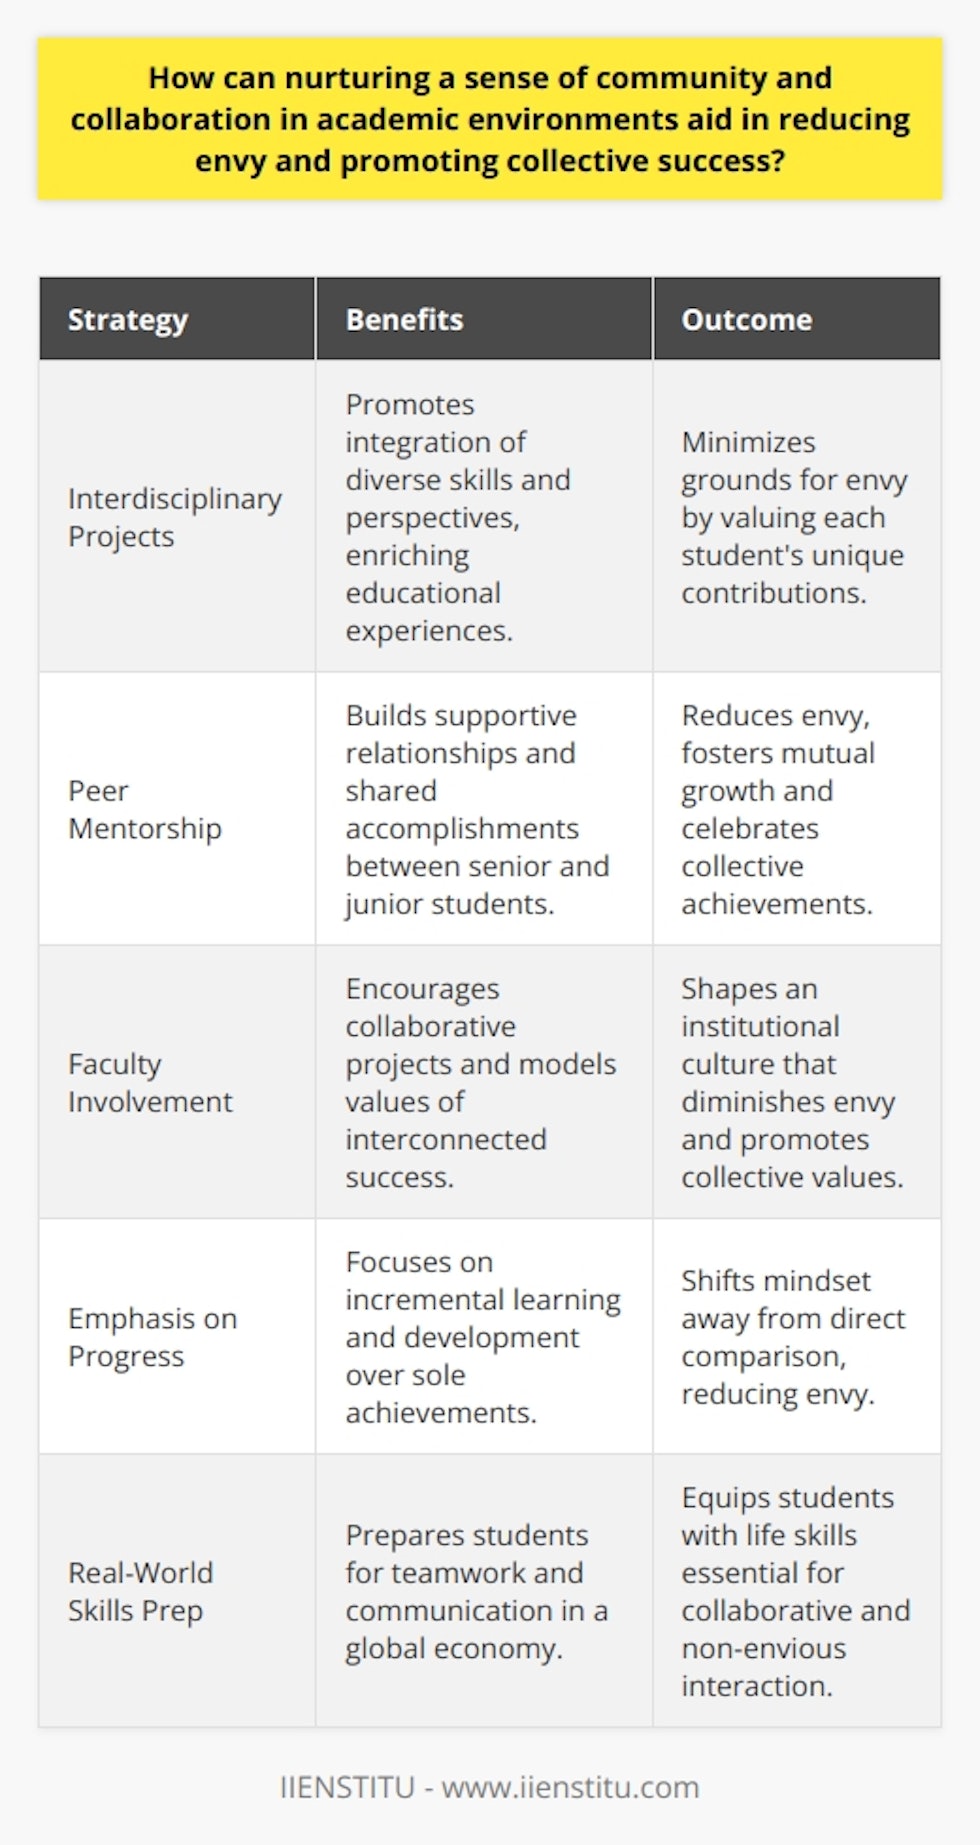 In academic settings, a sense of community and collaboration is pivotal for establishing an environment that not only advances learning but also addresses common emotional challenges, such as envy. When students work cooperatively, they tend to shift from a mindset of competition to one of shared growth and mutual support. This shift is instrumental in reducing feelings of envy and in fostering an atmosphere where collective success is celebrated.Interdisciplinary Projects and Peer MentorshipOne method of fostering a sense of community is through interdisciplinary projects that require collaboration across various fields of study. When students from different departments work together, they pool diverse talents and perspectives. This cross-pollination of ideas not only enriches the project but also allows students to appreciate the unique contributions of their peers, minimizing the grounds for envy.Furthermore, peer mentorship can be instrumental in instilling a sense of community. More experienced students guiding their juniors can create a nurturing educational environment. In a mentorship system, accomplishments are shared; the mentor experiences vicarious pleasure in the protégé’s success, while the mentee appreciates the support and wisdom of the mentor. This bidirectional exchange can significantly reduce envy as the relationship is based on mutual growth rather than comparison.The Role of Faculty and Institutional CultureFaculty members play a crucial role in setting the tone for collaboration. By encouraging group projects and recognizing collaborative efforts, they model the values of interconnected success. Additionally, institutions such as IIENSTITU, which prioritize community-building in their educational approach, serve as examples of how institutional culture can influence individual behaviors. When collective success is part of an institution's core values, it becomes embedded in student interactions, thereby pivoting away from an environment ripe for envy.Emphasizing Progress, Not Just AchievementAnother essential aspect is focusing on progress rather than just achievement. When educational environments celebrate incremental improvements and learning processes, success is viewed as a journey rather than a single point of arrival. This diminishes envy because the emphasis is on long-term development instead of instant results; students feel their growth is equally important, which helps to mitigate comparisons.Real-World Collaboration and Communication SkillsLastly, academic environments that nurture community and collaboration are in fact preparing students for the real world. Today’s interconnected global economy prizes teamwork and clear communication. By reducing envy and promoting communal achievements, educational institutions not only improve interpersonal dynamics in the classroom but also equip students with essential life skills.In summary, community fostering in academic environments benefits everyone involved. It allows for a multidisciplinary approach, mentorship opportunities, progress celebration, and real-world preparedness. By reducing envy and emphasizing the values of inclusivity and interdependence, we pave the way for collective success, shaping not only better learners but also creating a more collaborative future society.